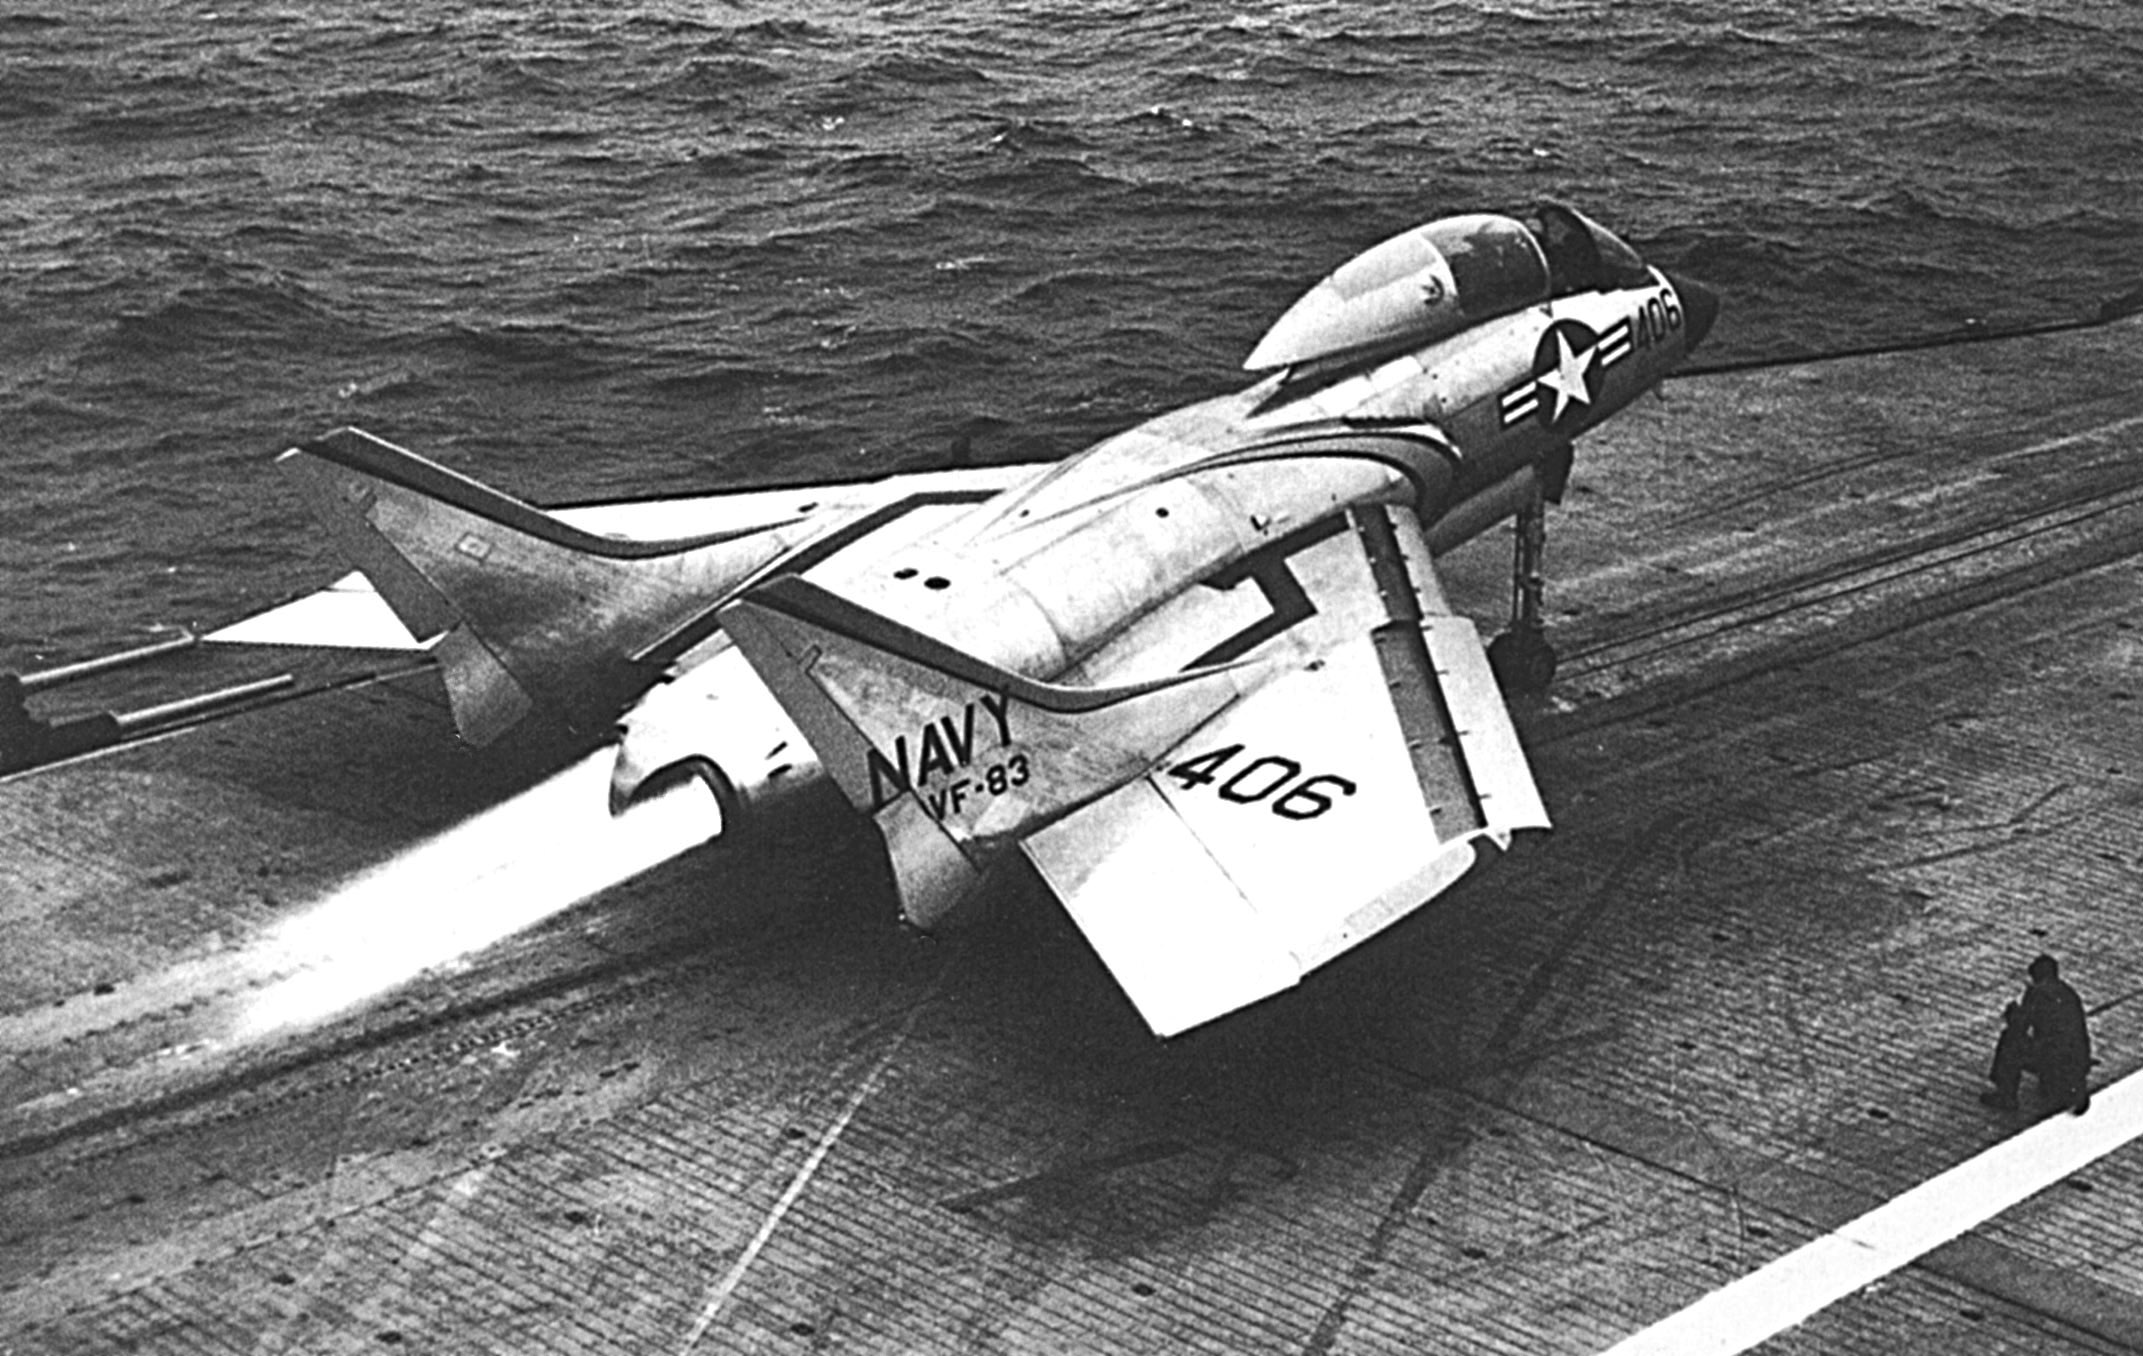 Despite first flying in the late 40s the later model F7Us had afterburners.